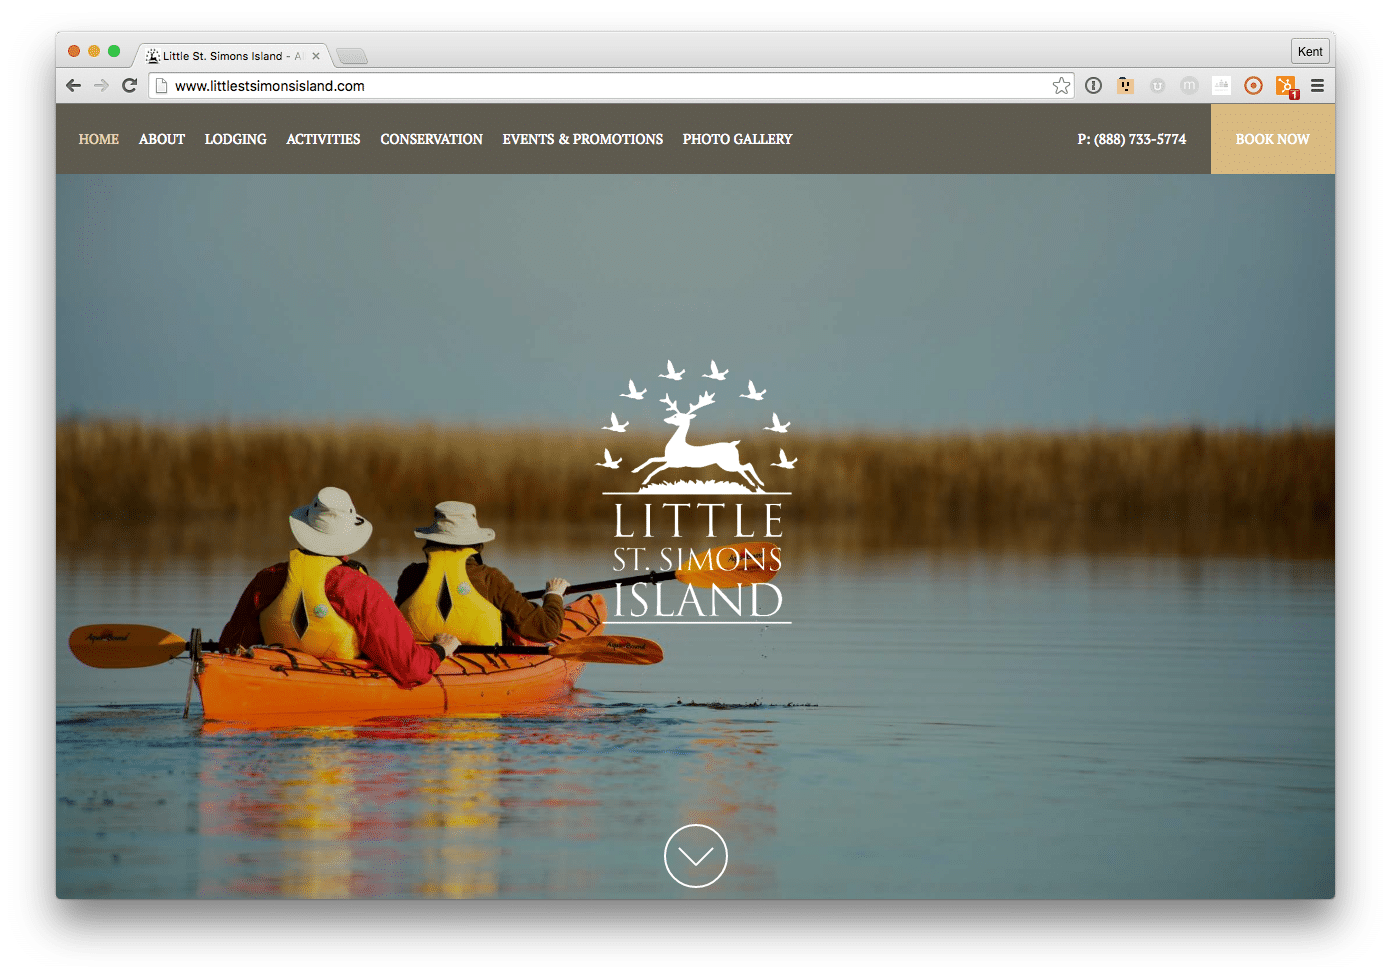 Little St .Simons Island - great example of what a bed & breakfast website's home page should look like